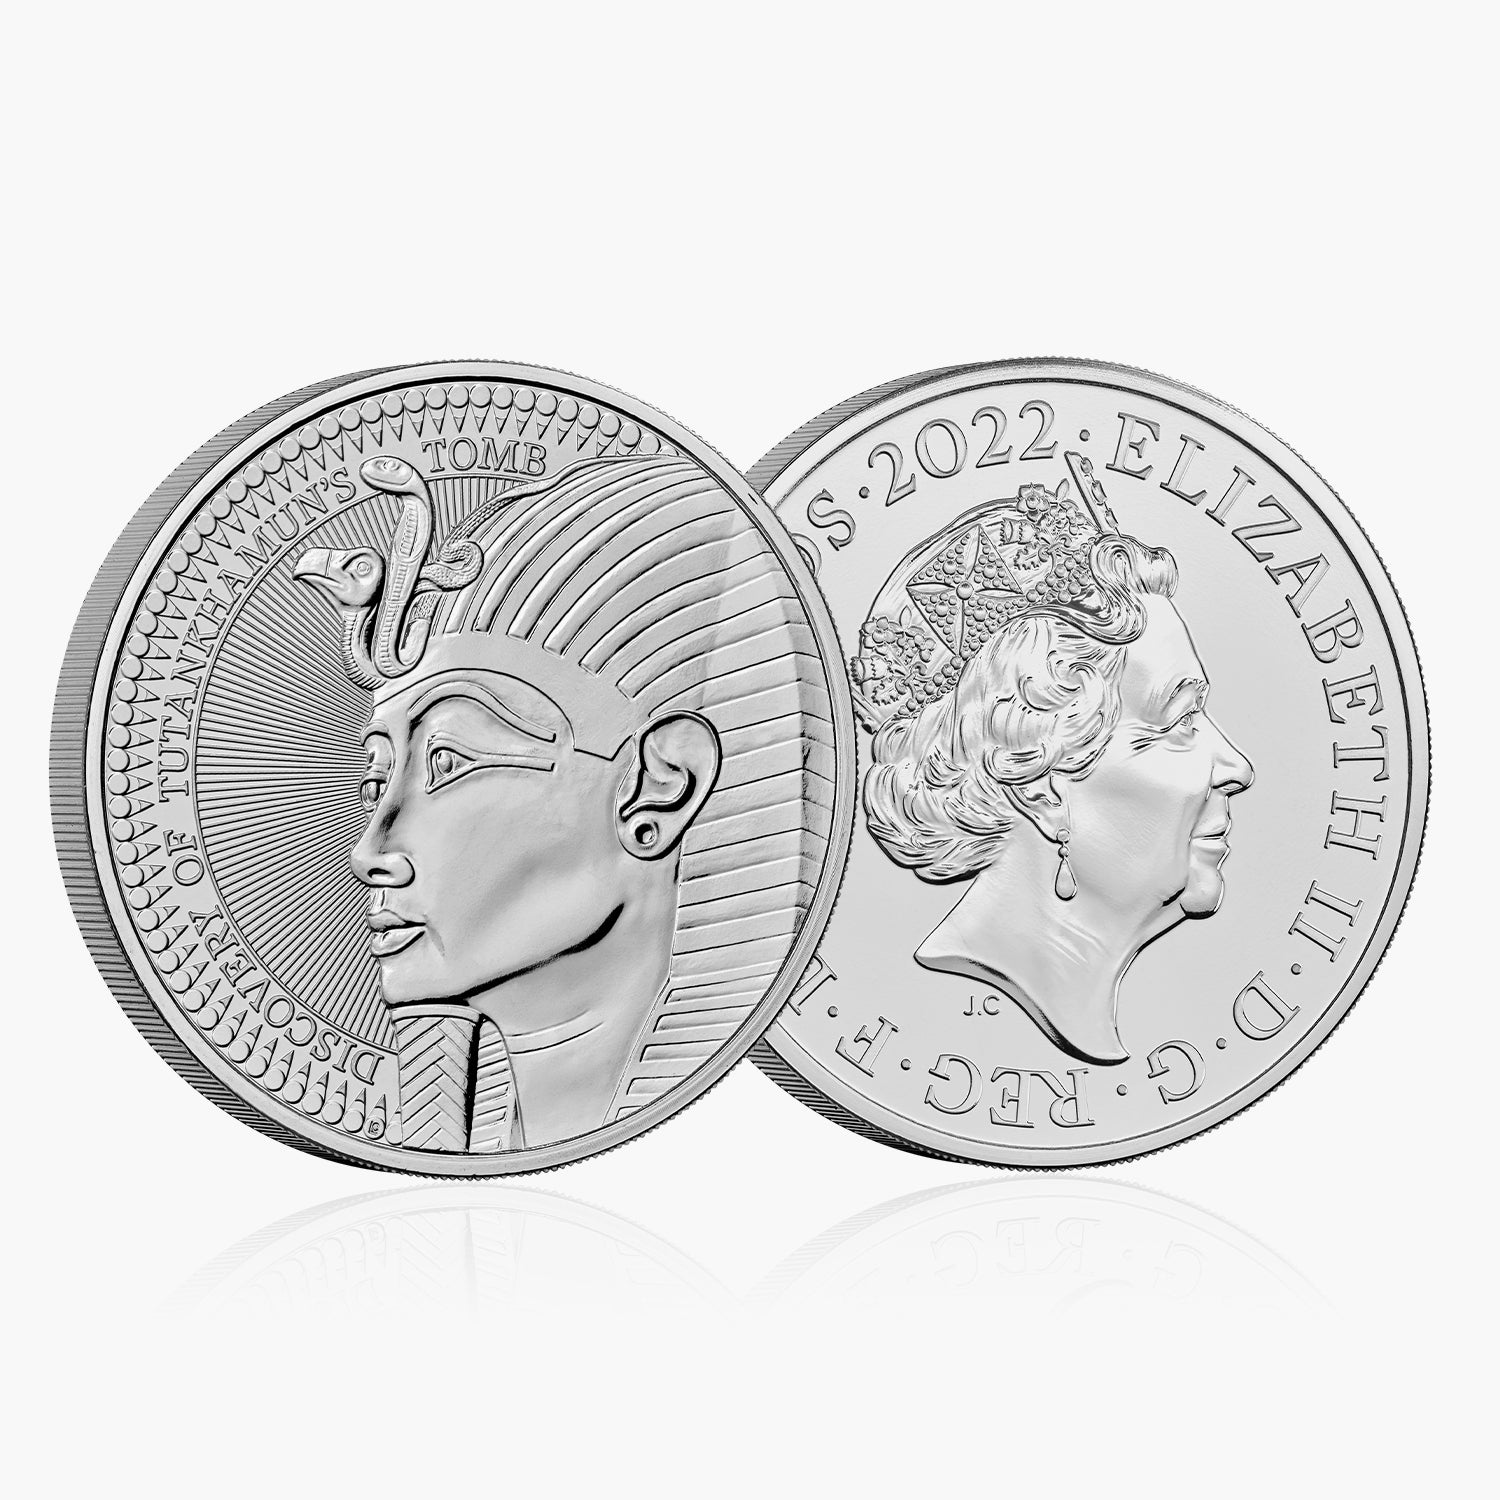 The 100th Anniversary of the Discovery of Tutankhamun’s Tomb 2022 UK £5 Brilliant Uncirculated Coin